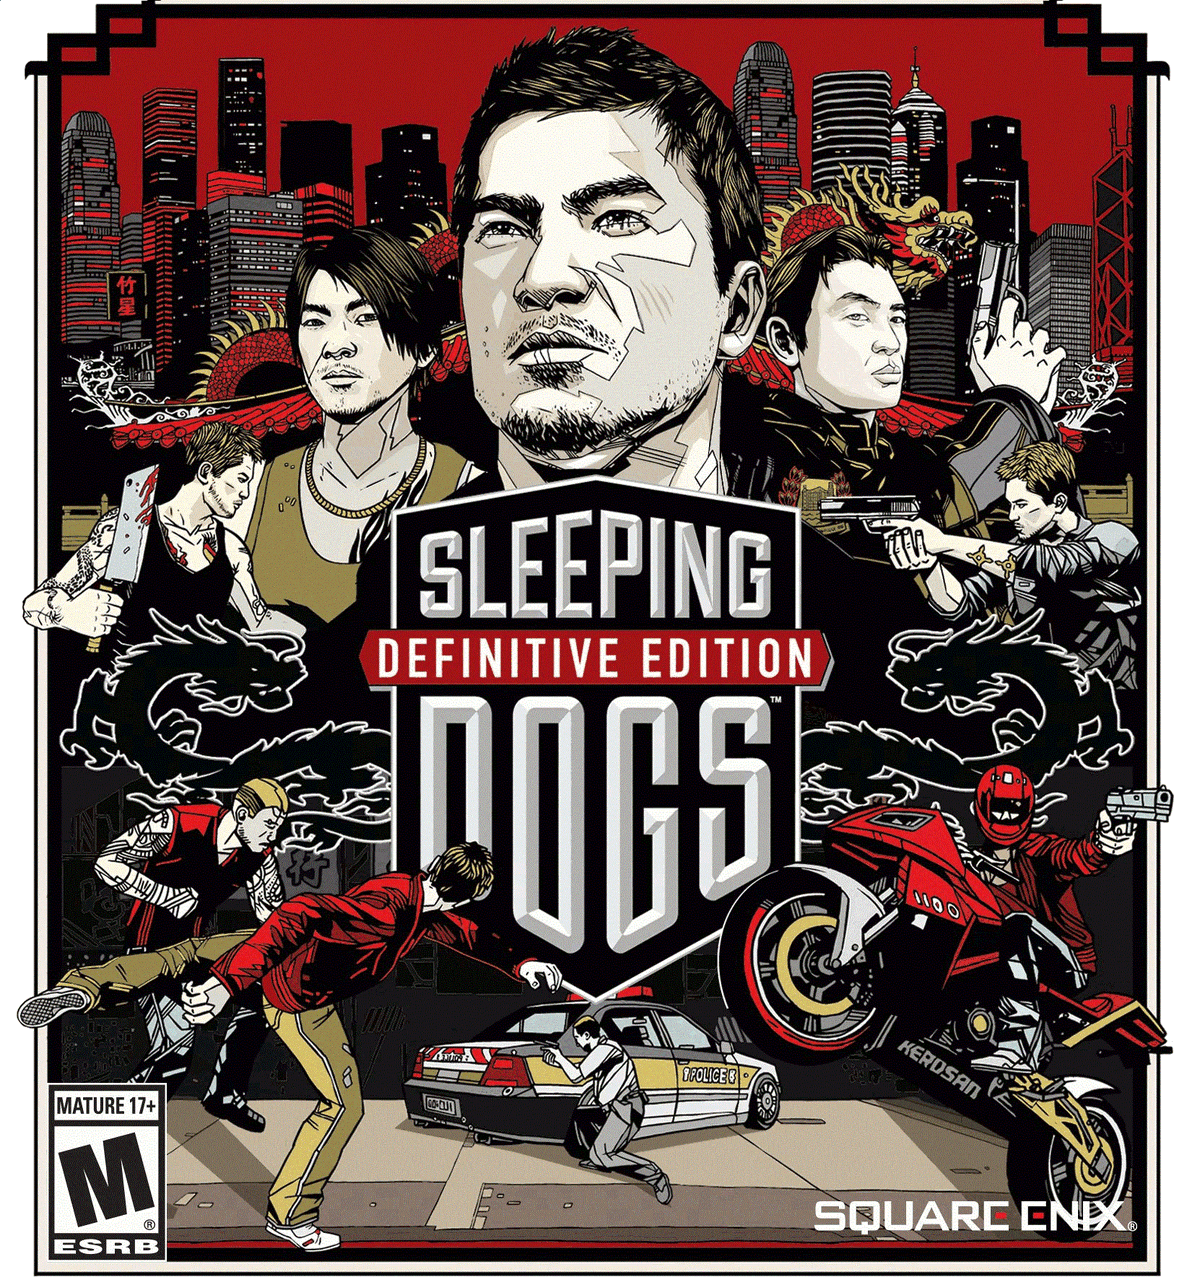 Upcoming Sleeping Dogs DLC Detailed - MonsterVine